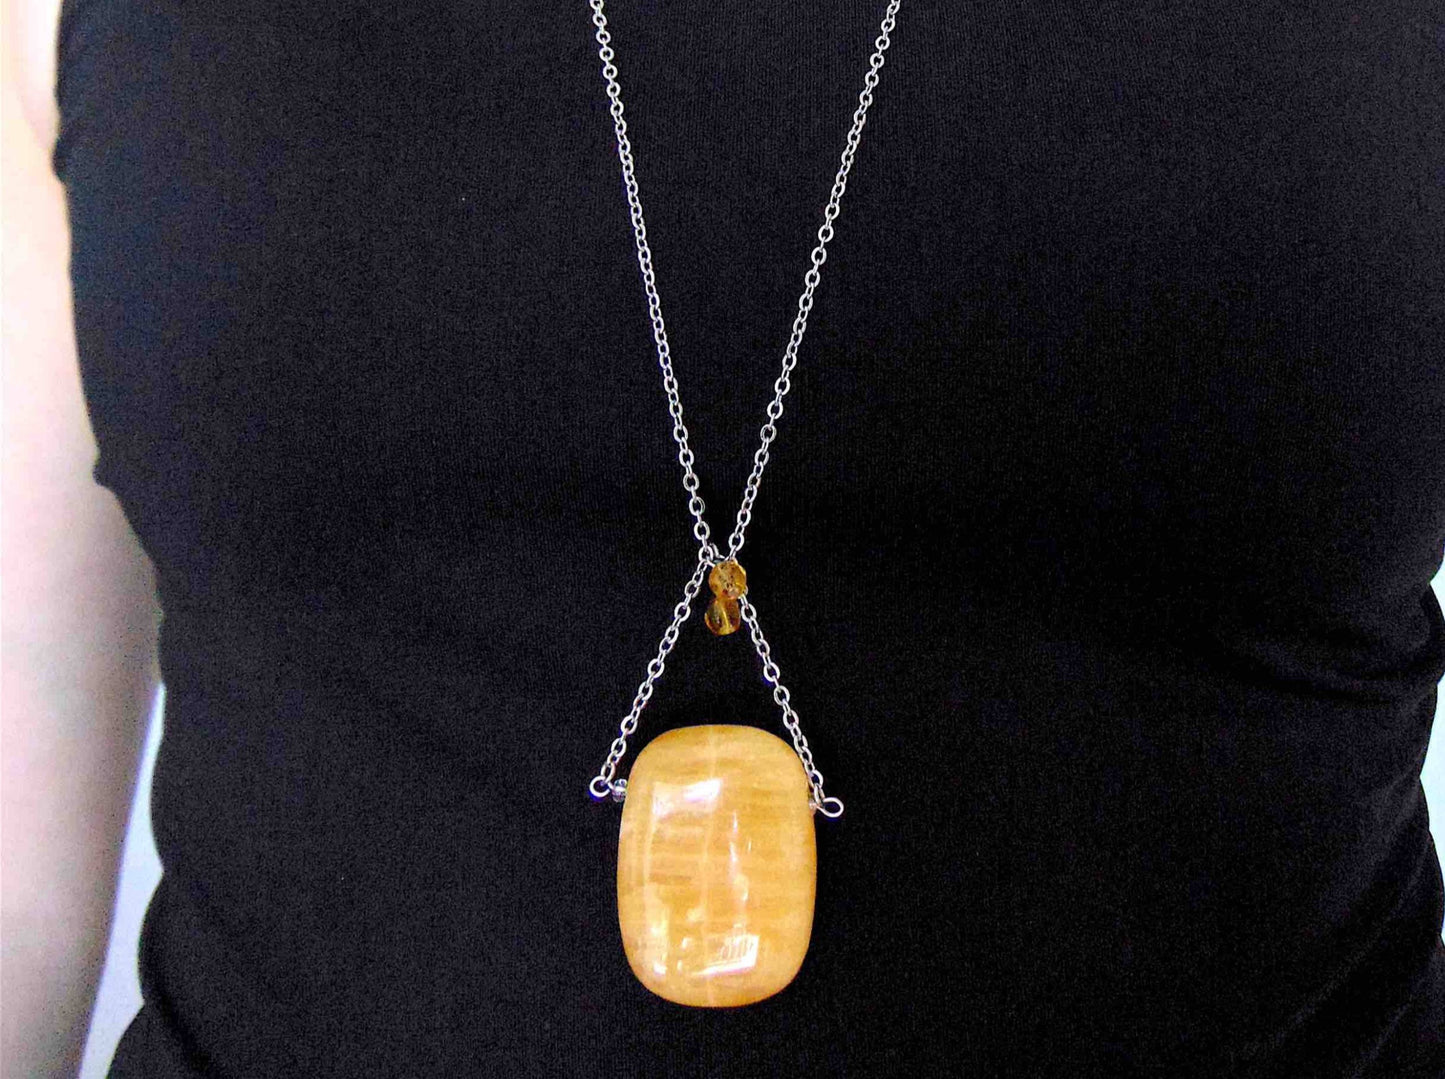 30-inch necklace with large rectangular honey yellow calcite stone pendant, triangular layout, matching glass beads, stainless steel chain